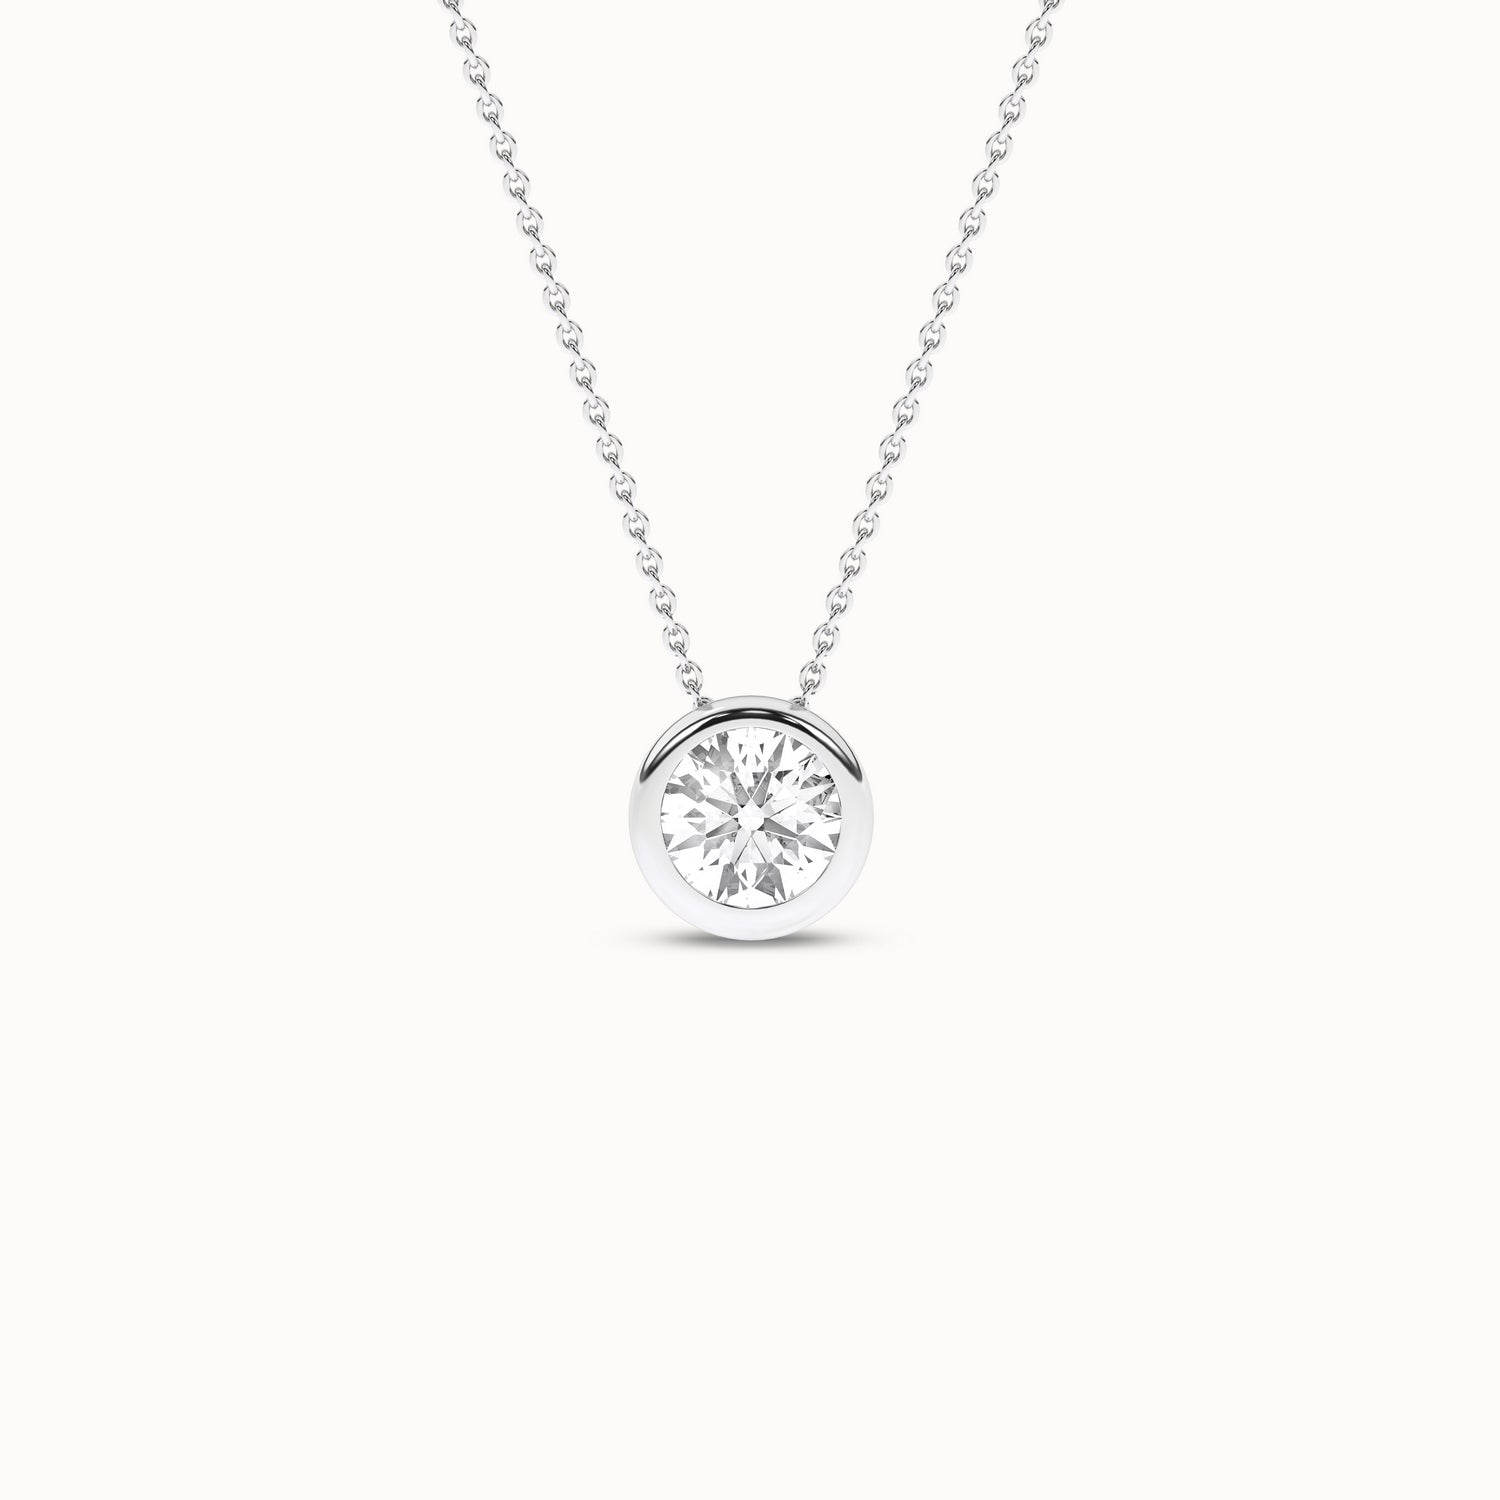 Encompassing Round Necklace_Product Angle_1/4Ct. - 1